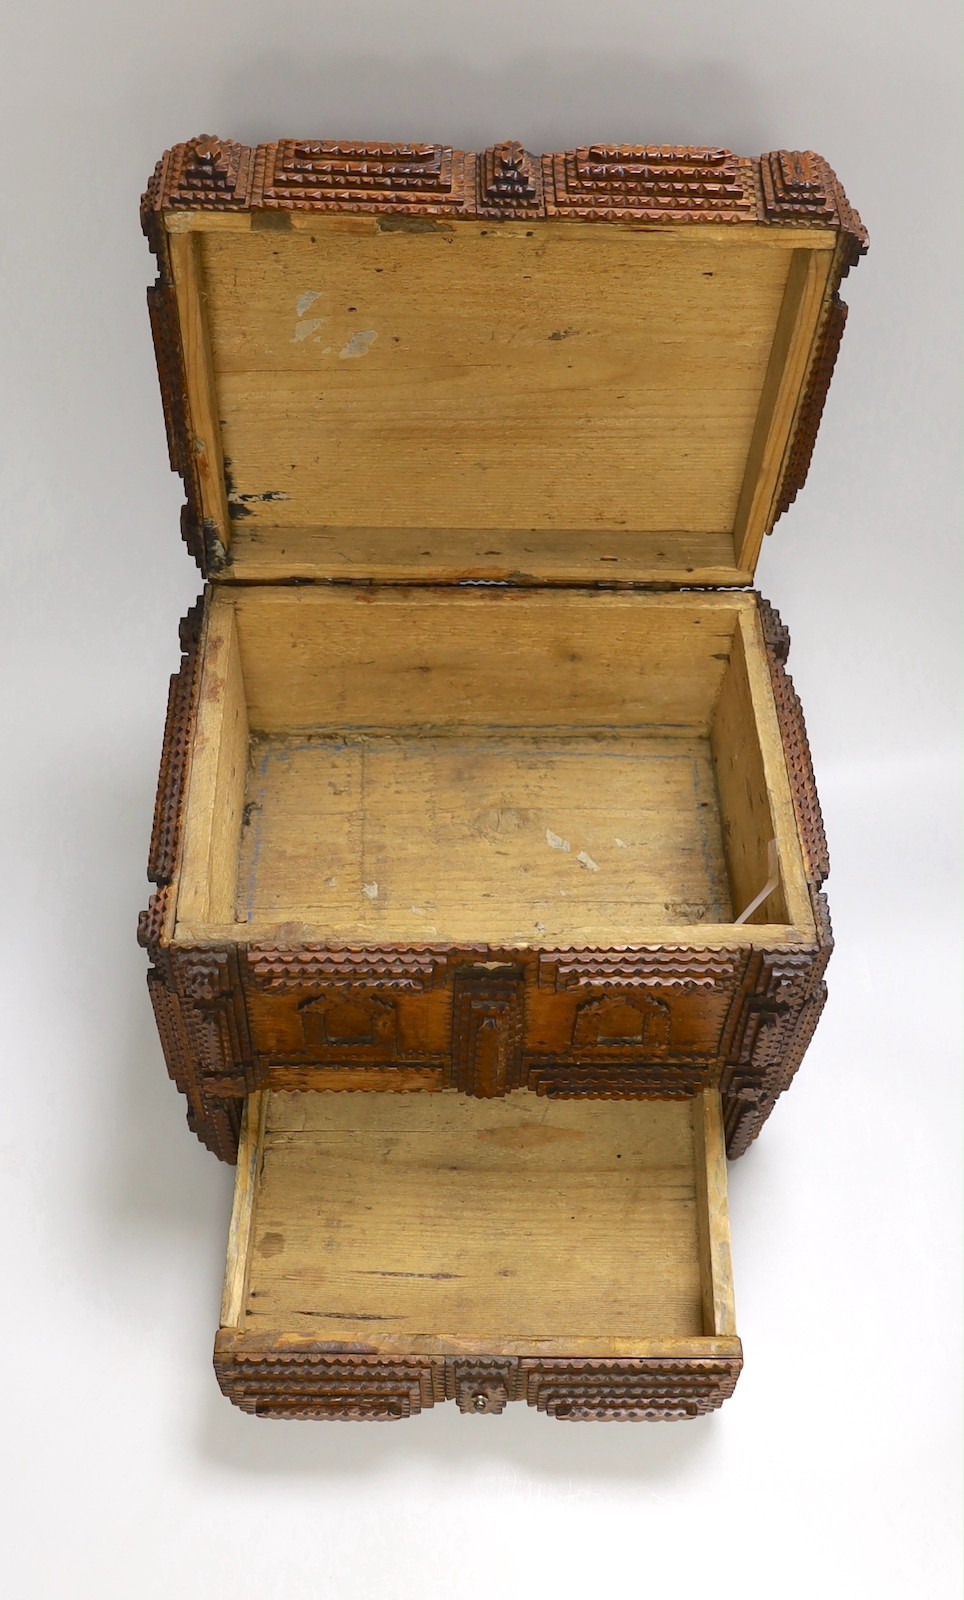 A late 19th century Tramp art elaborately chip-carved wood casket. 24cm high - Image 2 of 2